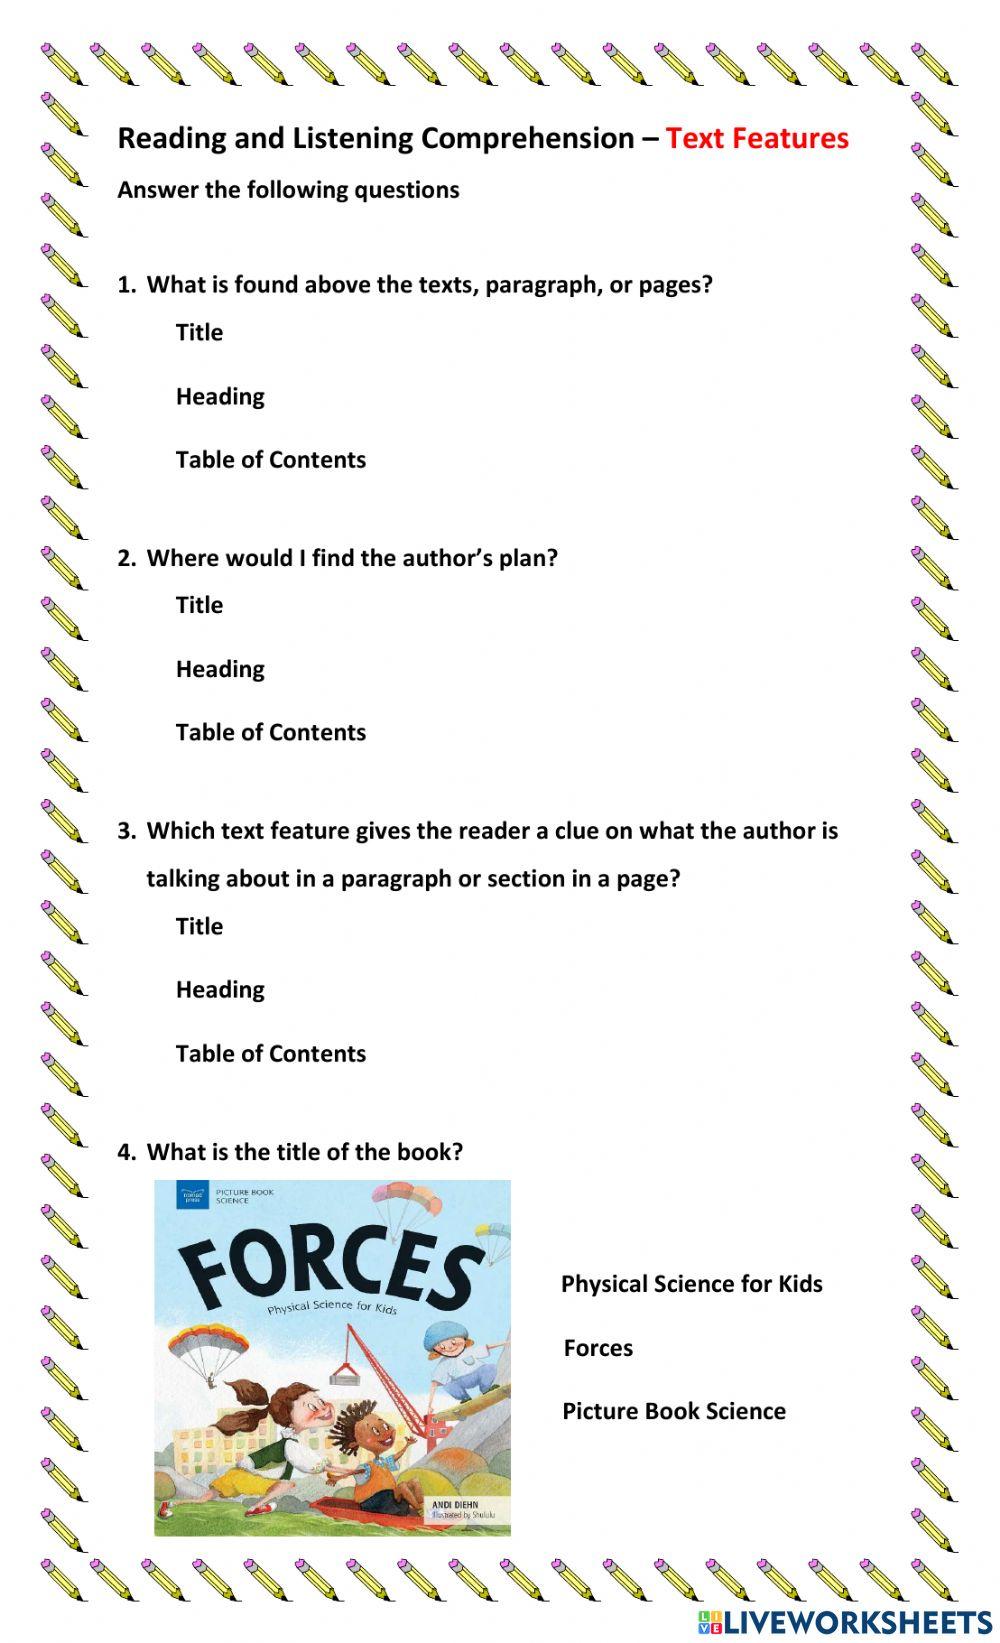 Comprehension - Text Features